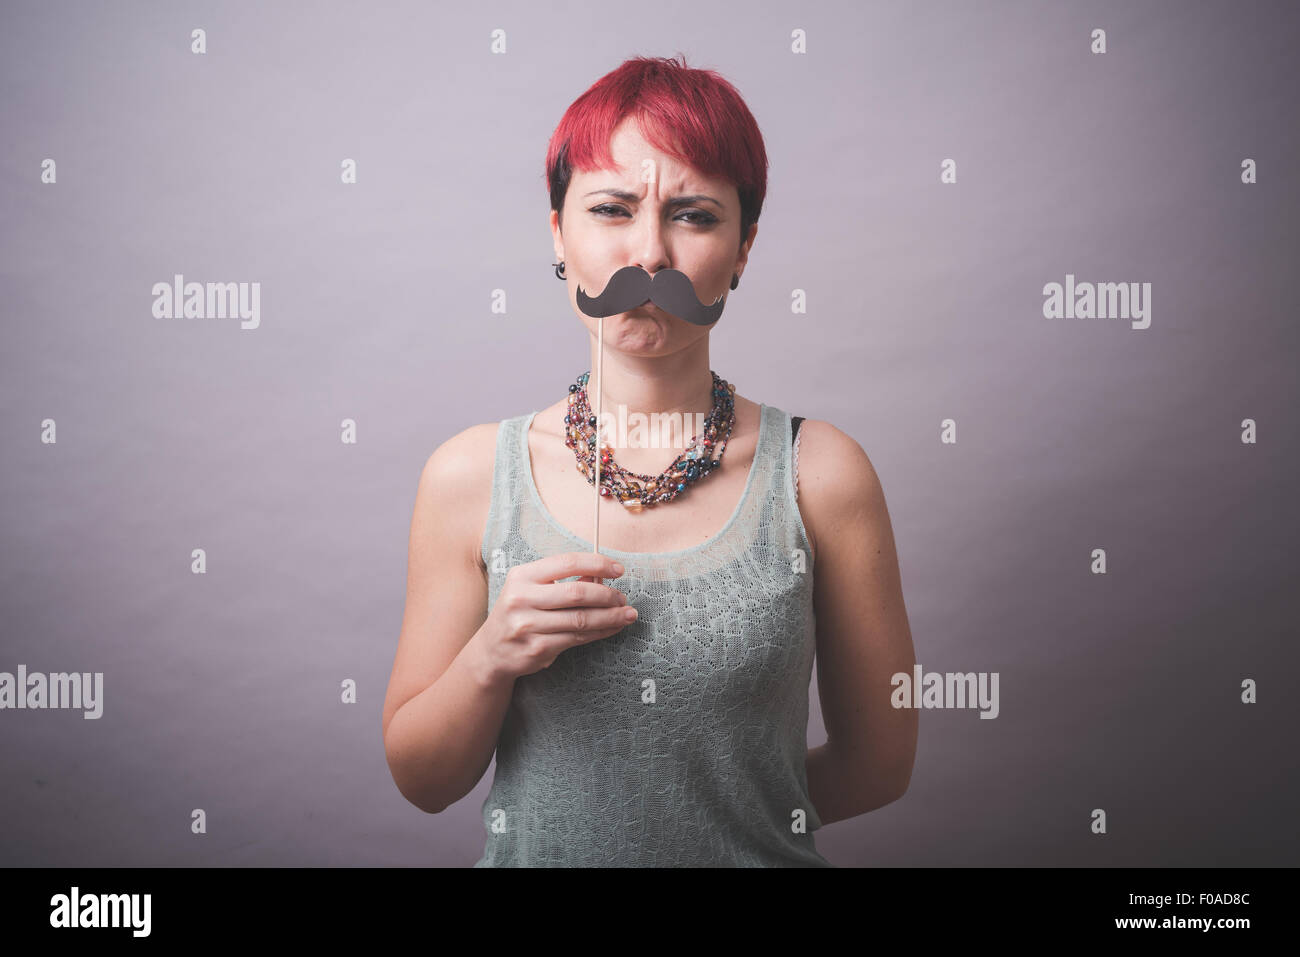 Studio portrait of confused young woman holding up mustache in front of face Stock Photo